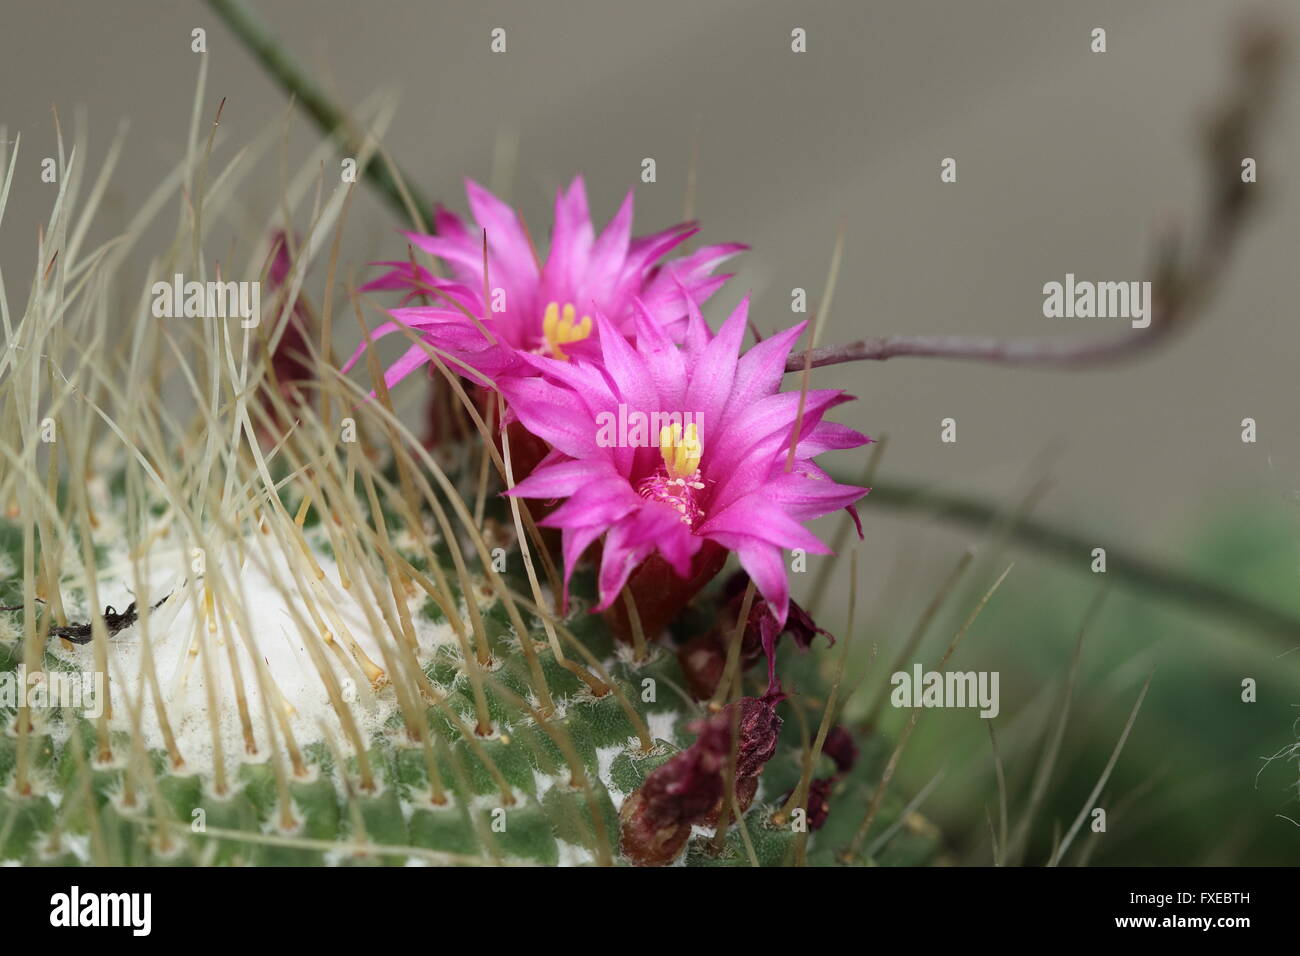 Close up image  of blooming flower of Red headed Irishman or Mammillaria spinosissima Cactus Stock Photo